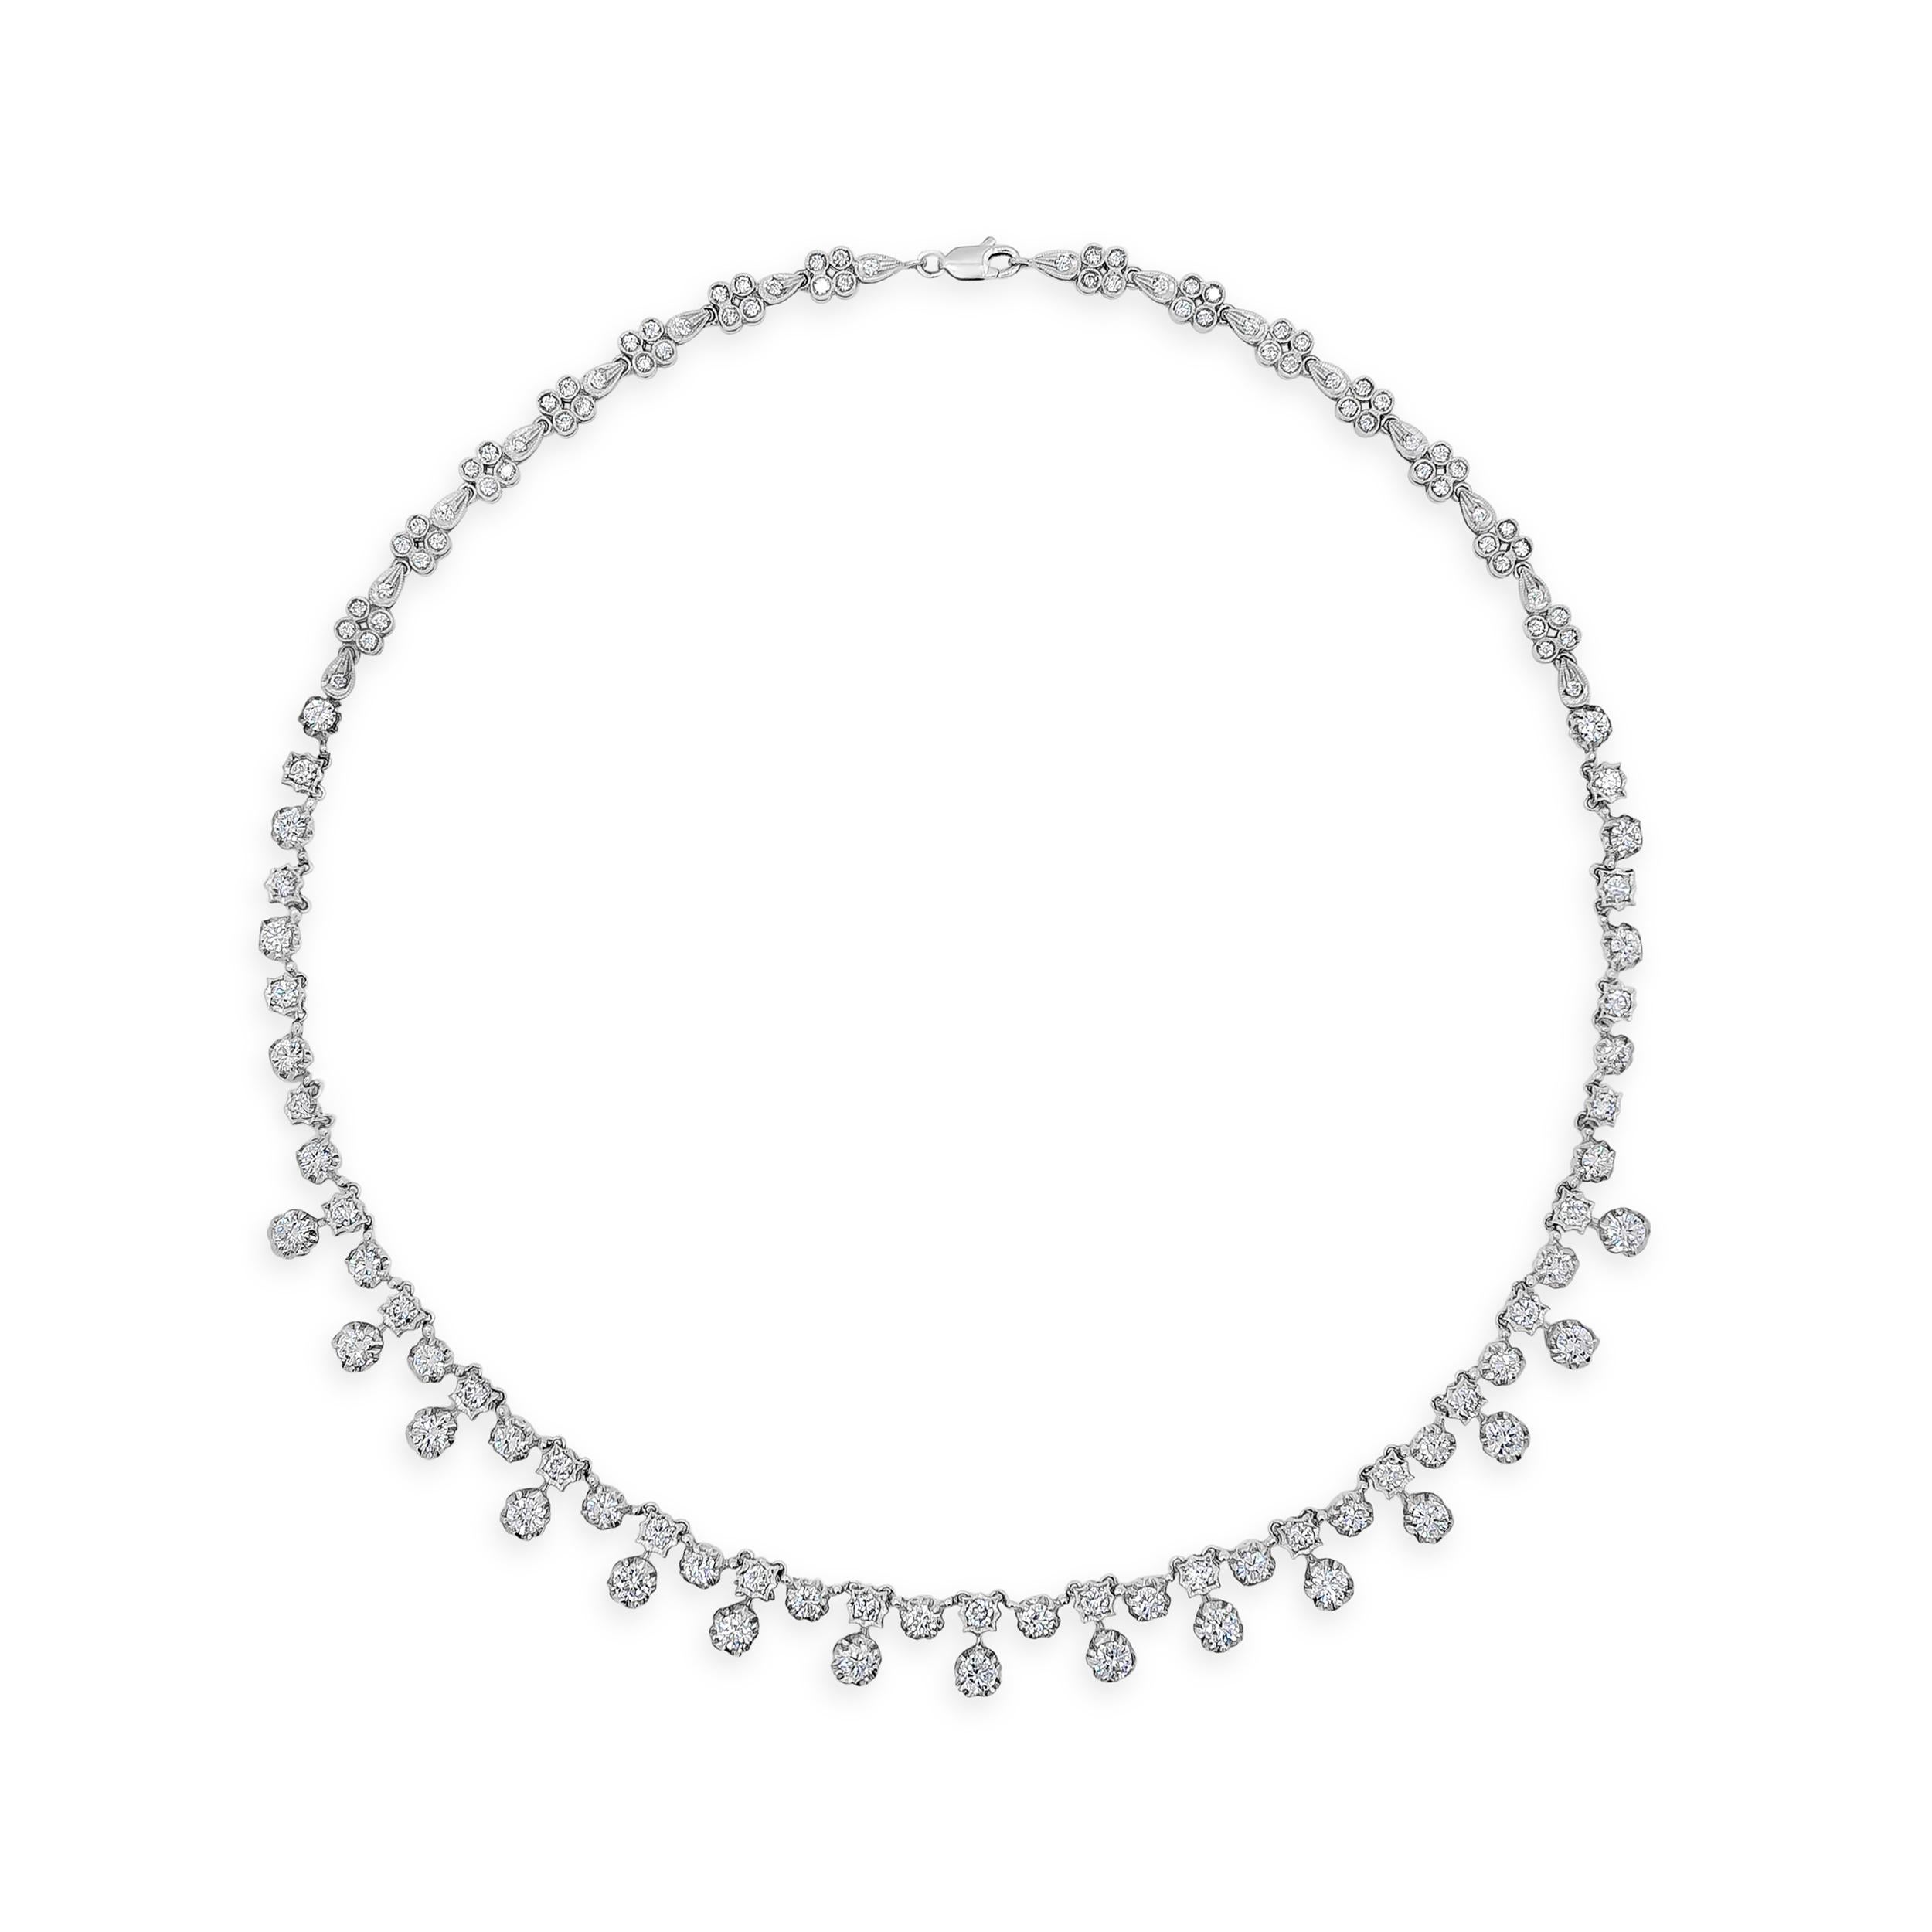 A modern and chic necklace style showcasing round brilliant diamonds weighing 7.81 carats total; Set in a starburst-like setting made in 18 karat white gold. A very brilliant piece of jewelry. 16 inches in length. 

Roman Malakov is a custom house,